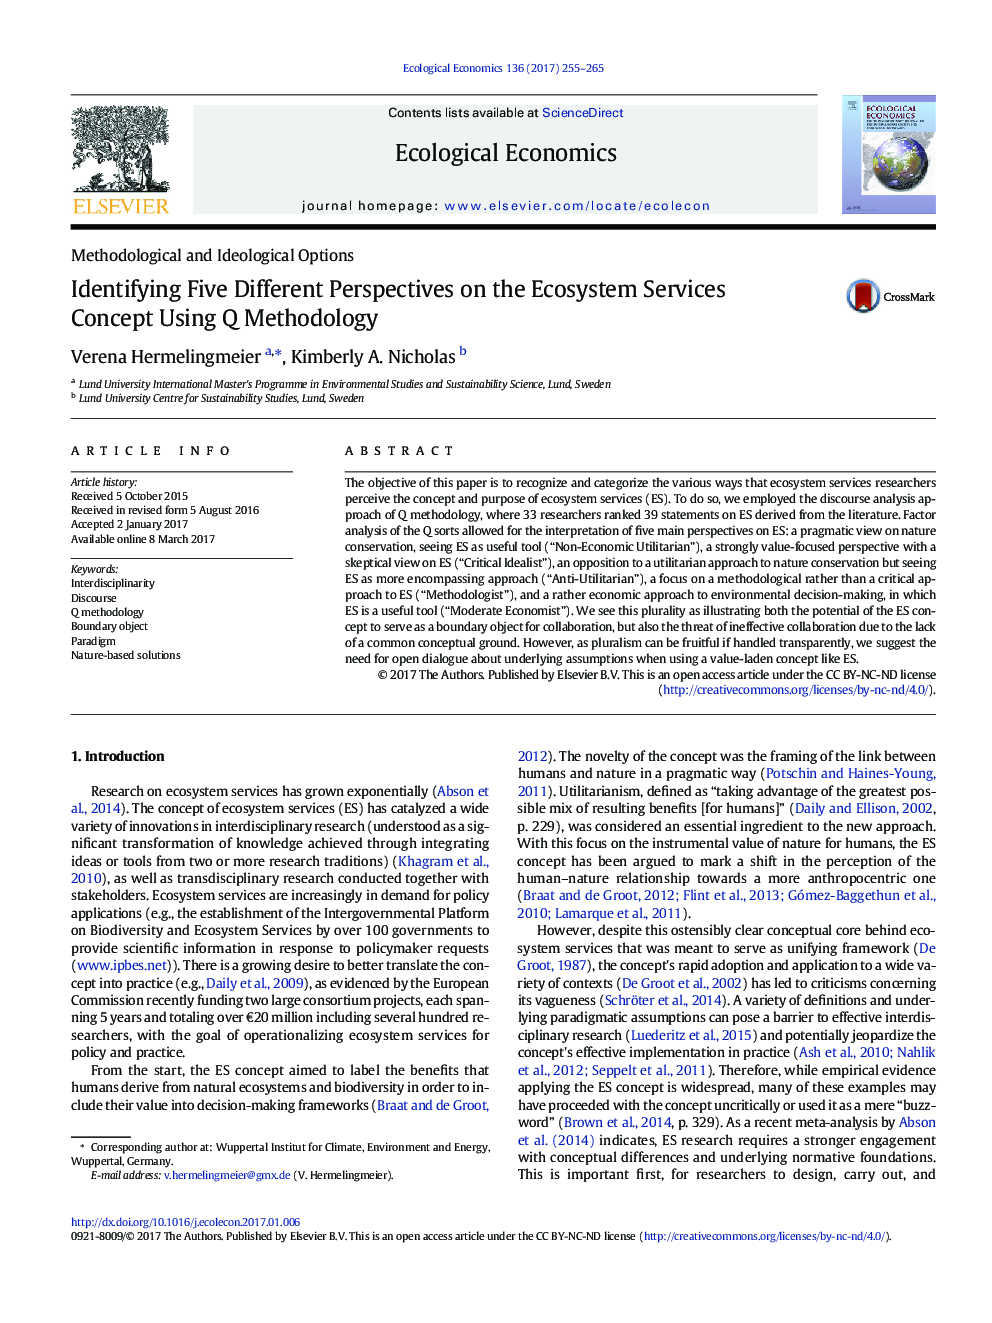 Identifying Five Different Perspectives on the Ecosystem Services Concept Using Q Methodology